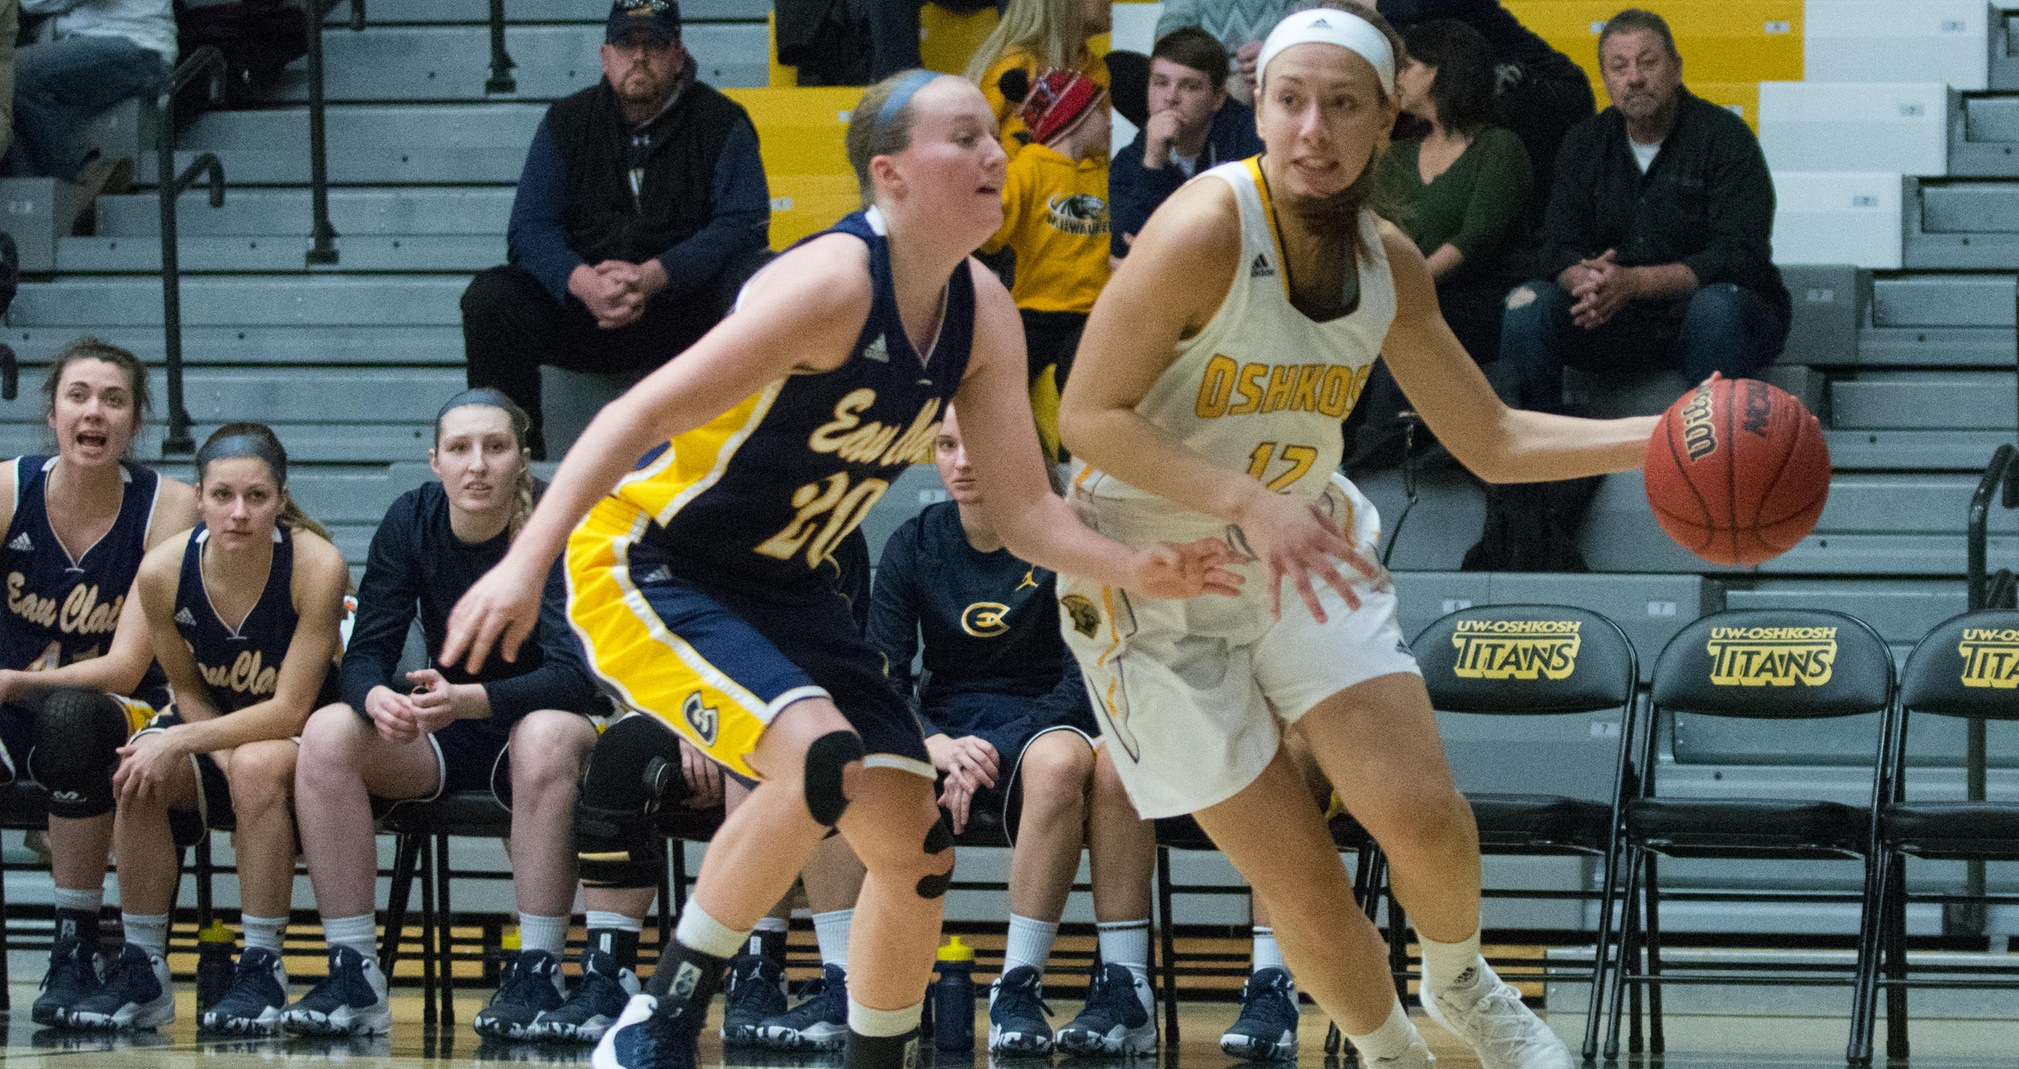 Olivia Campbell grabbed three rebounds and scored all six of her points against the Blugolds from the free throw line.